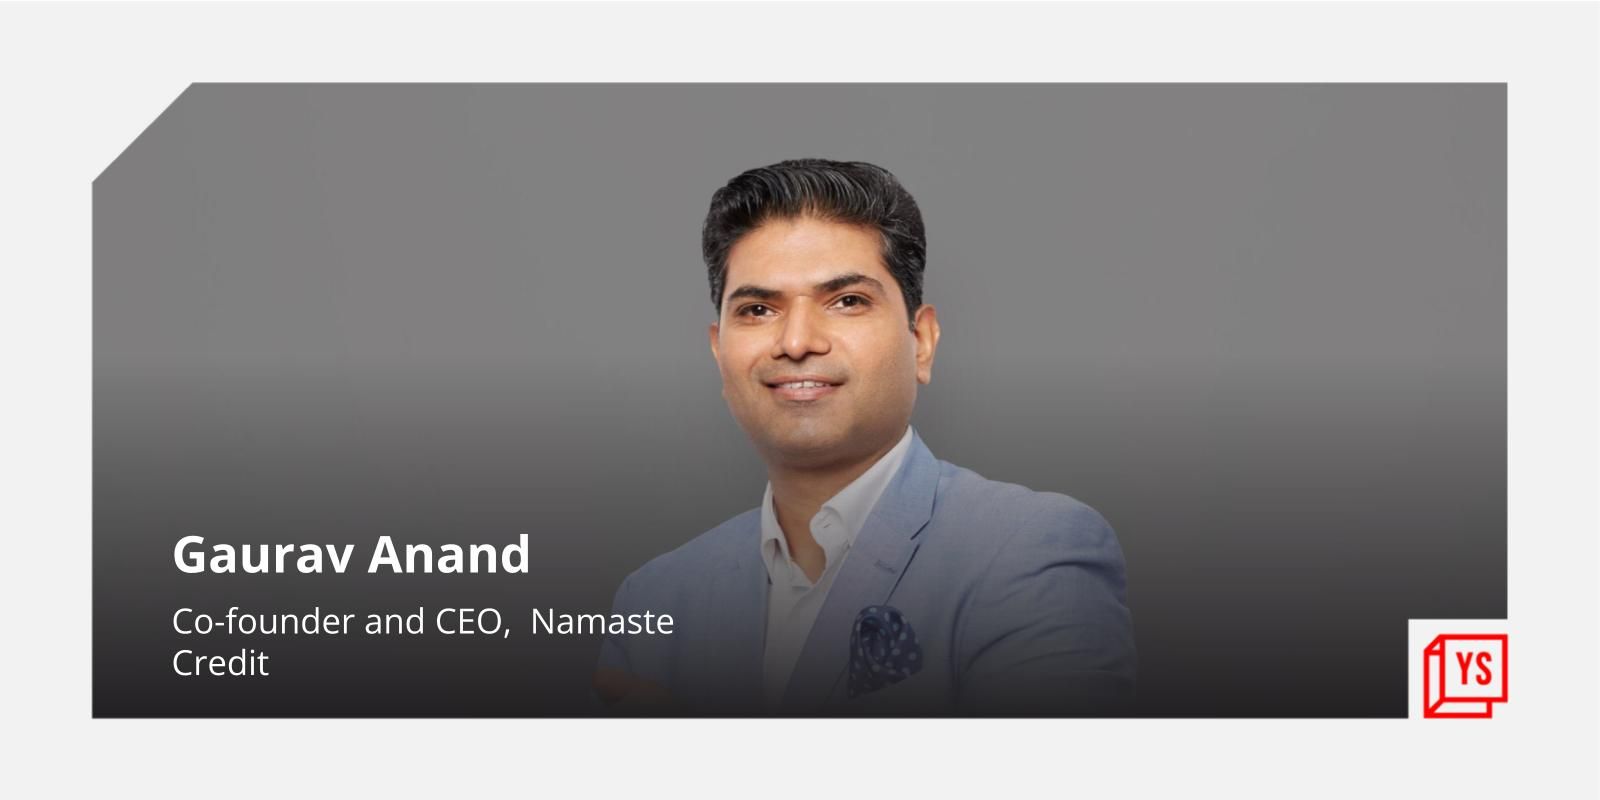 [Product Roadmap] How focus on technology helped Namaste Credit serve over 25,000 SMEs in 6 years